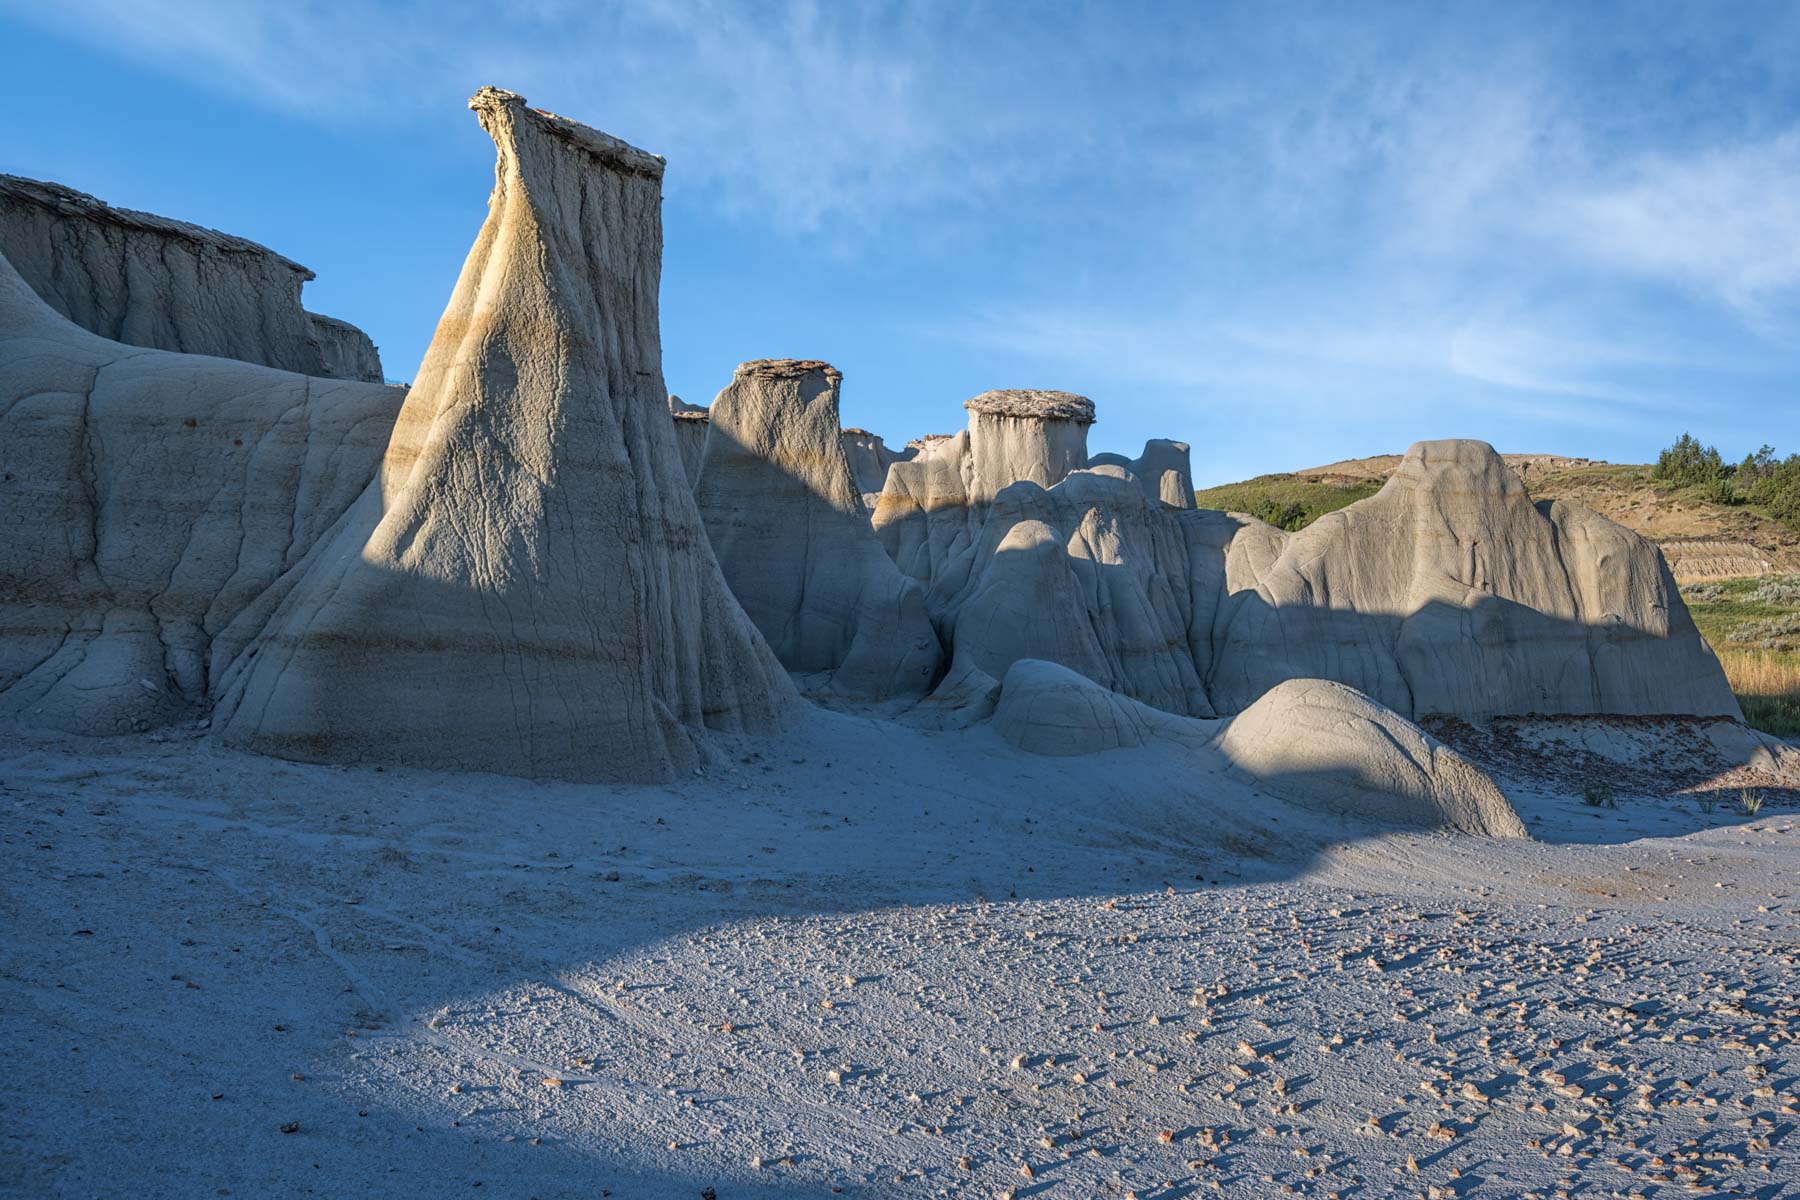 Hoodoos in the South Unit of Theodore Roosevelt National Park